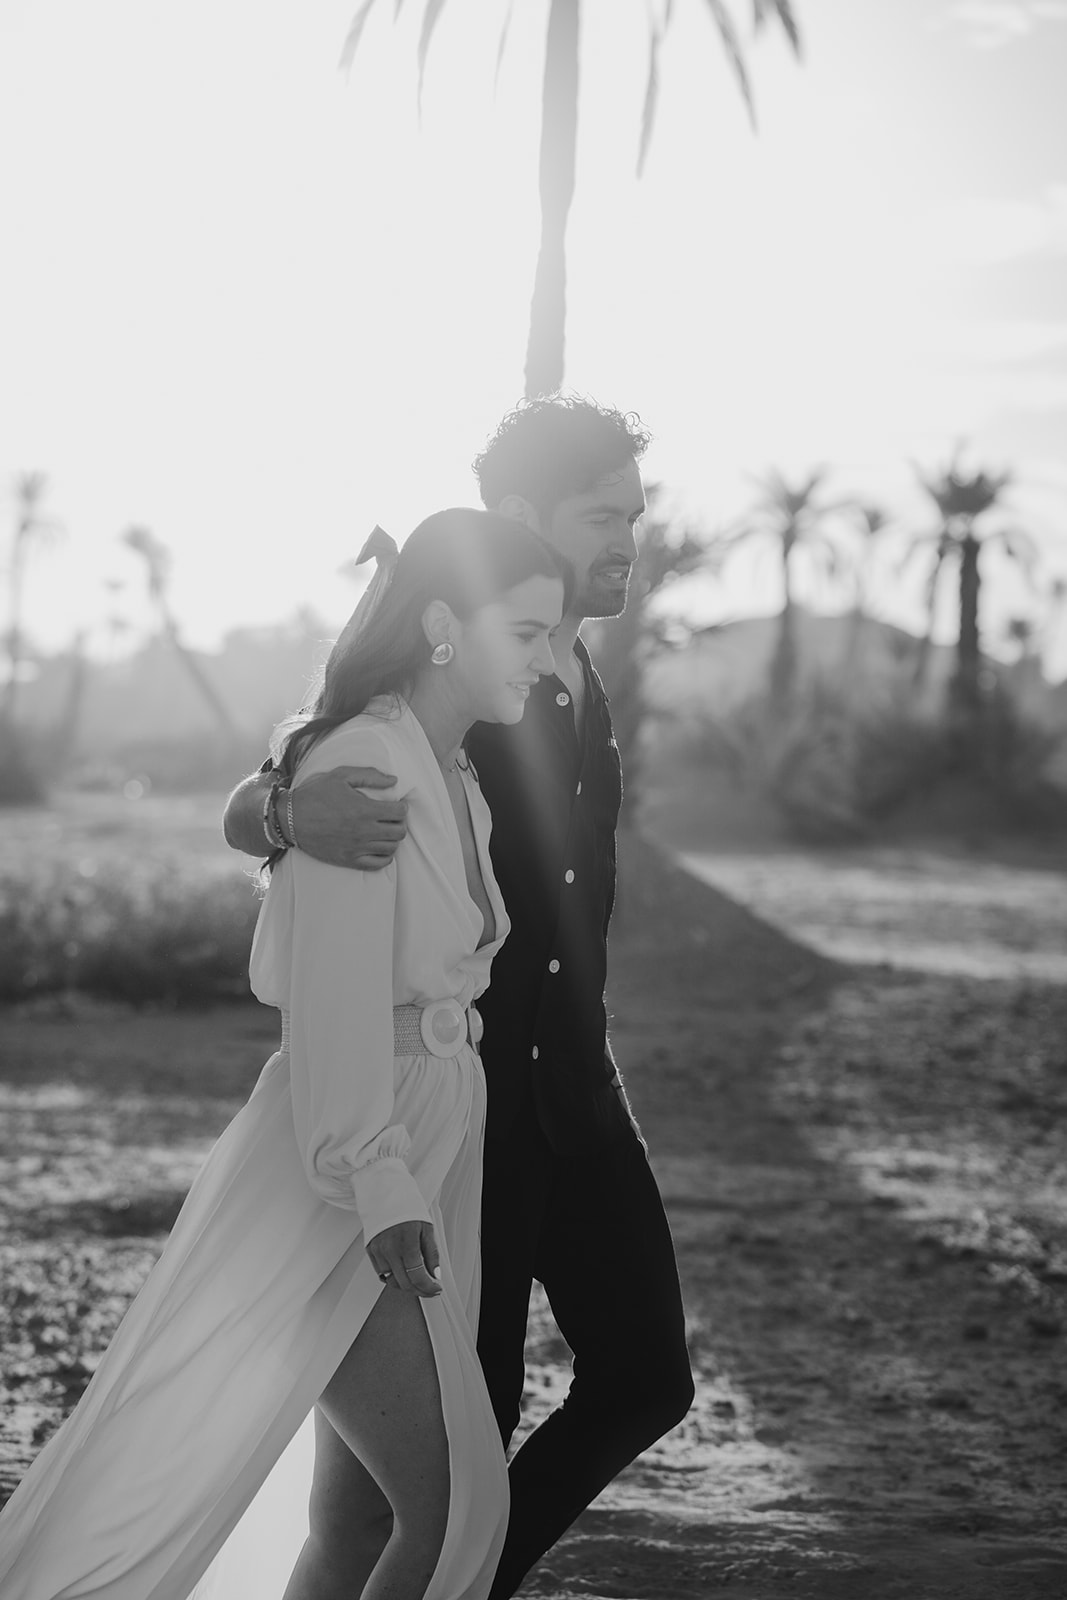 A couple who eloped in Marrakech walk in the Moroccan dessert at sunrise